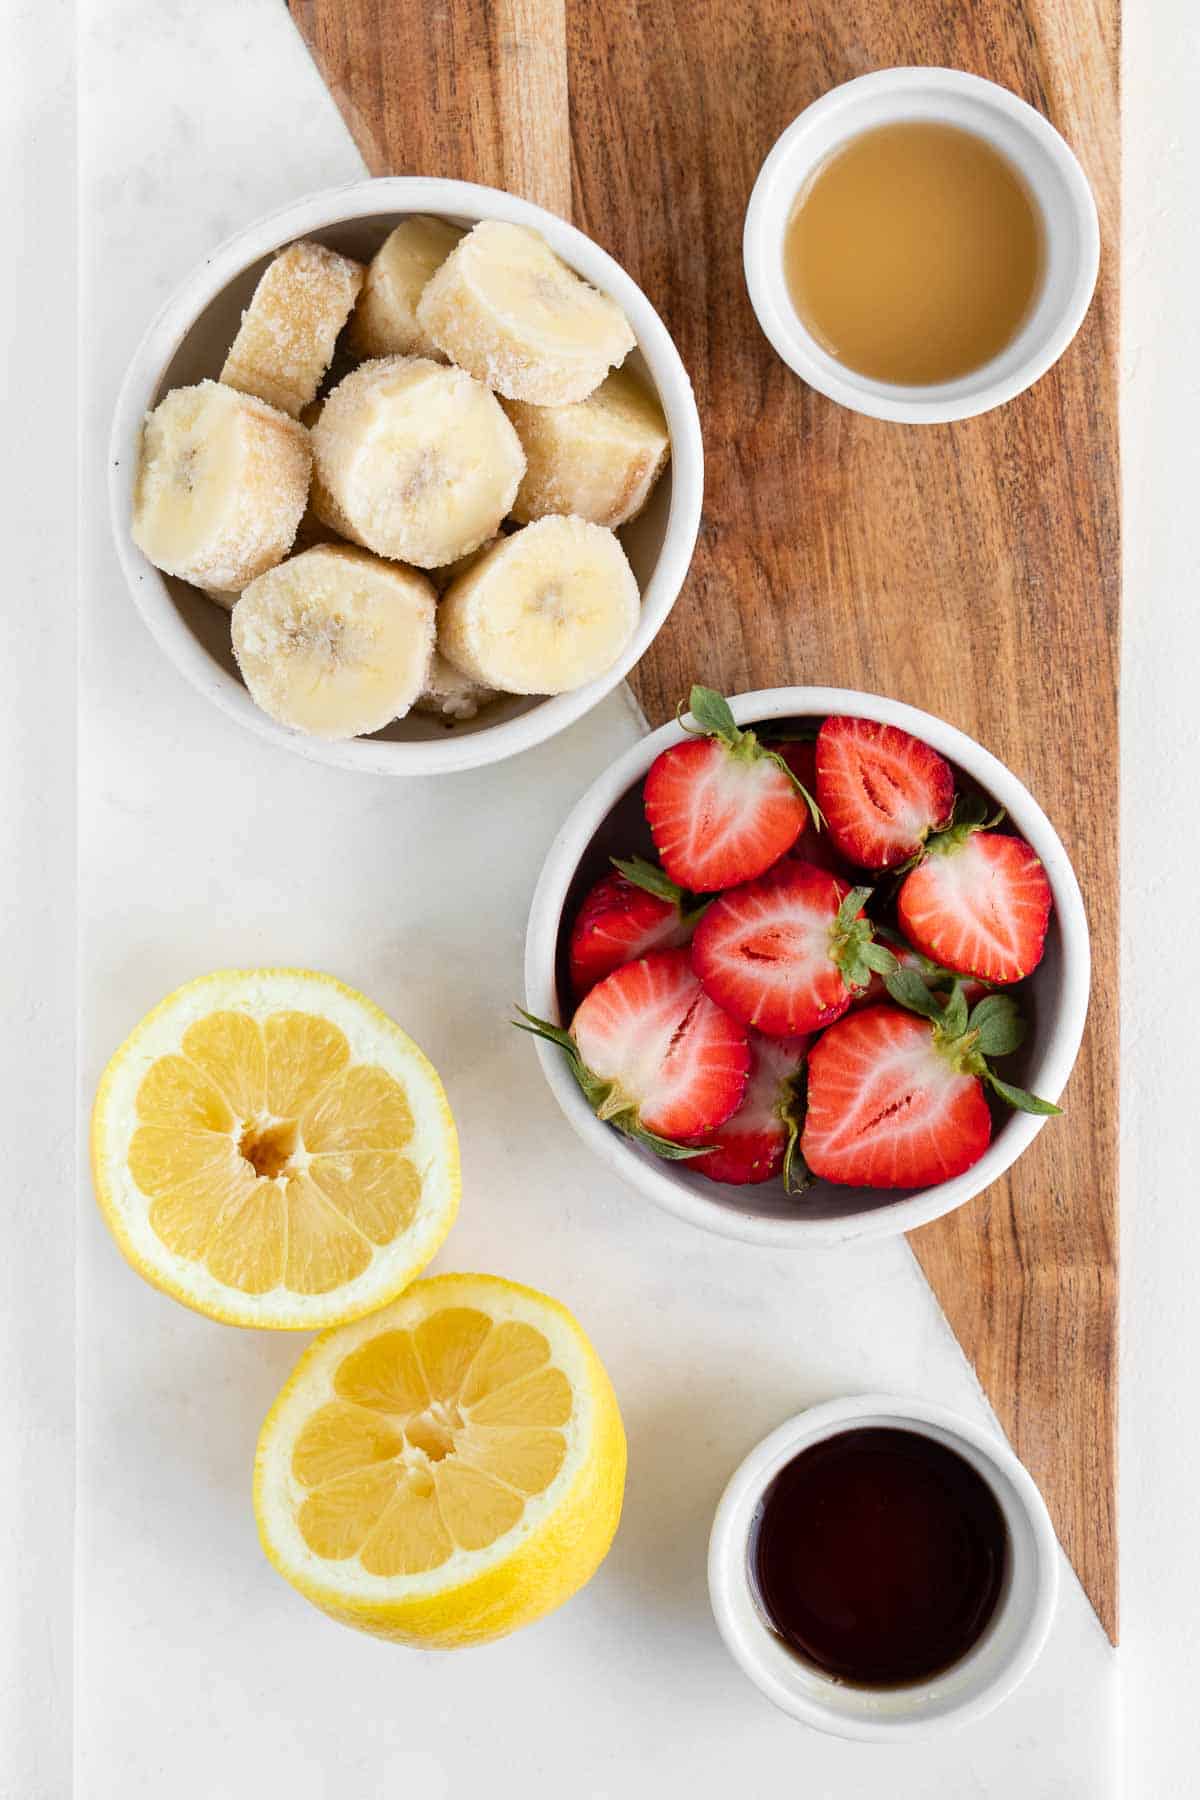 a marble and wooden board topped with a sliced lemon, a bowl of berries, a bowl of frozen bananas, a bowl of maple syrup, and a bowl of lemon juice